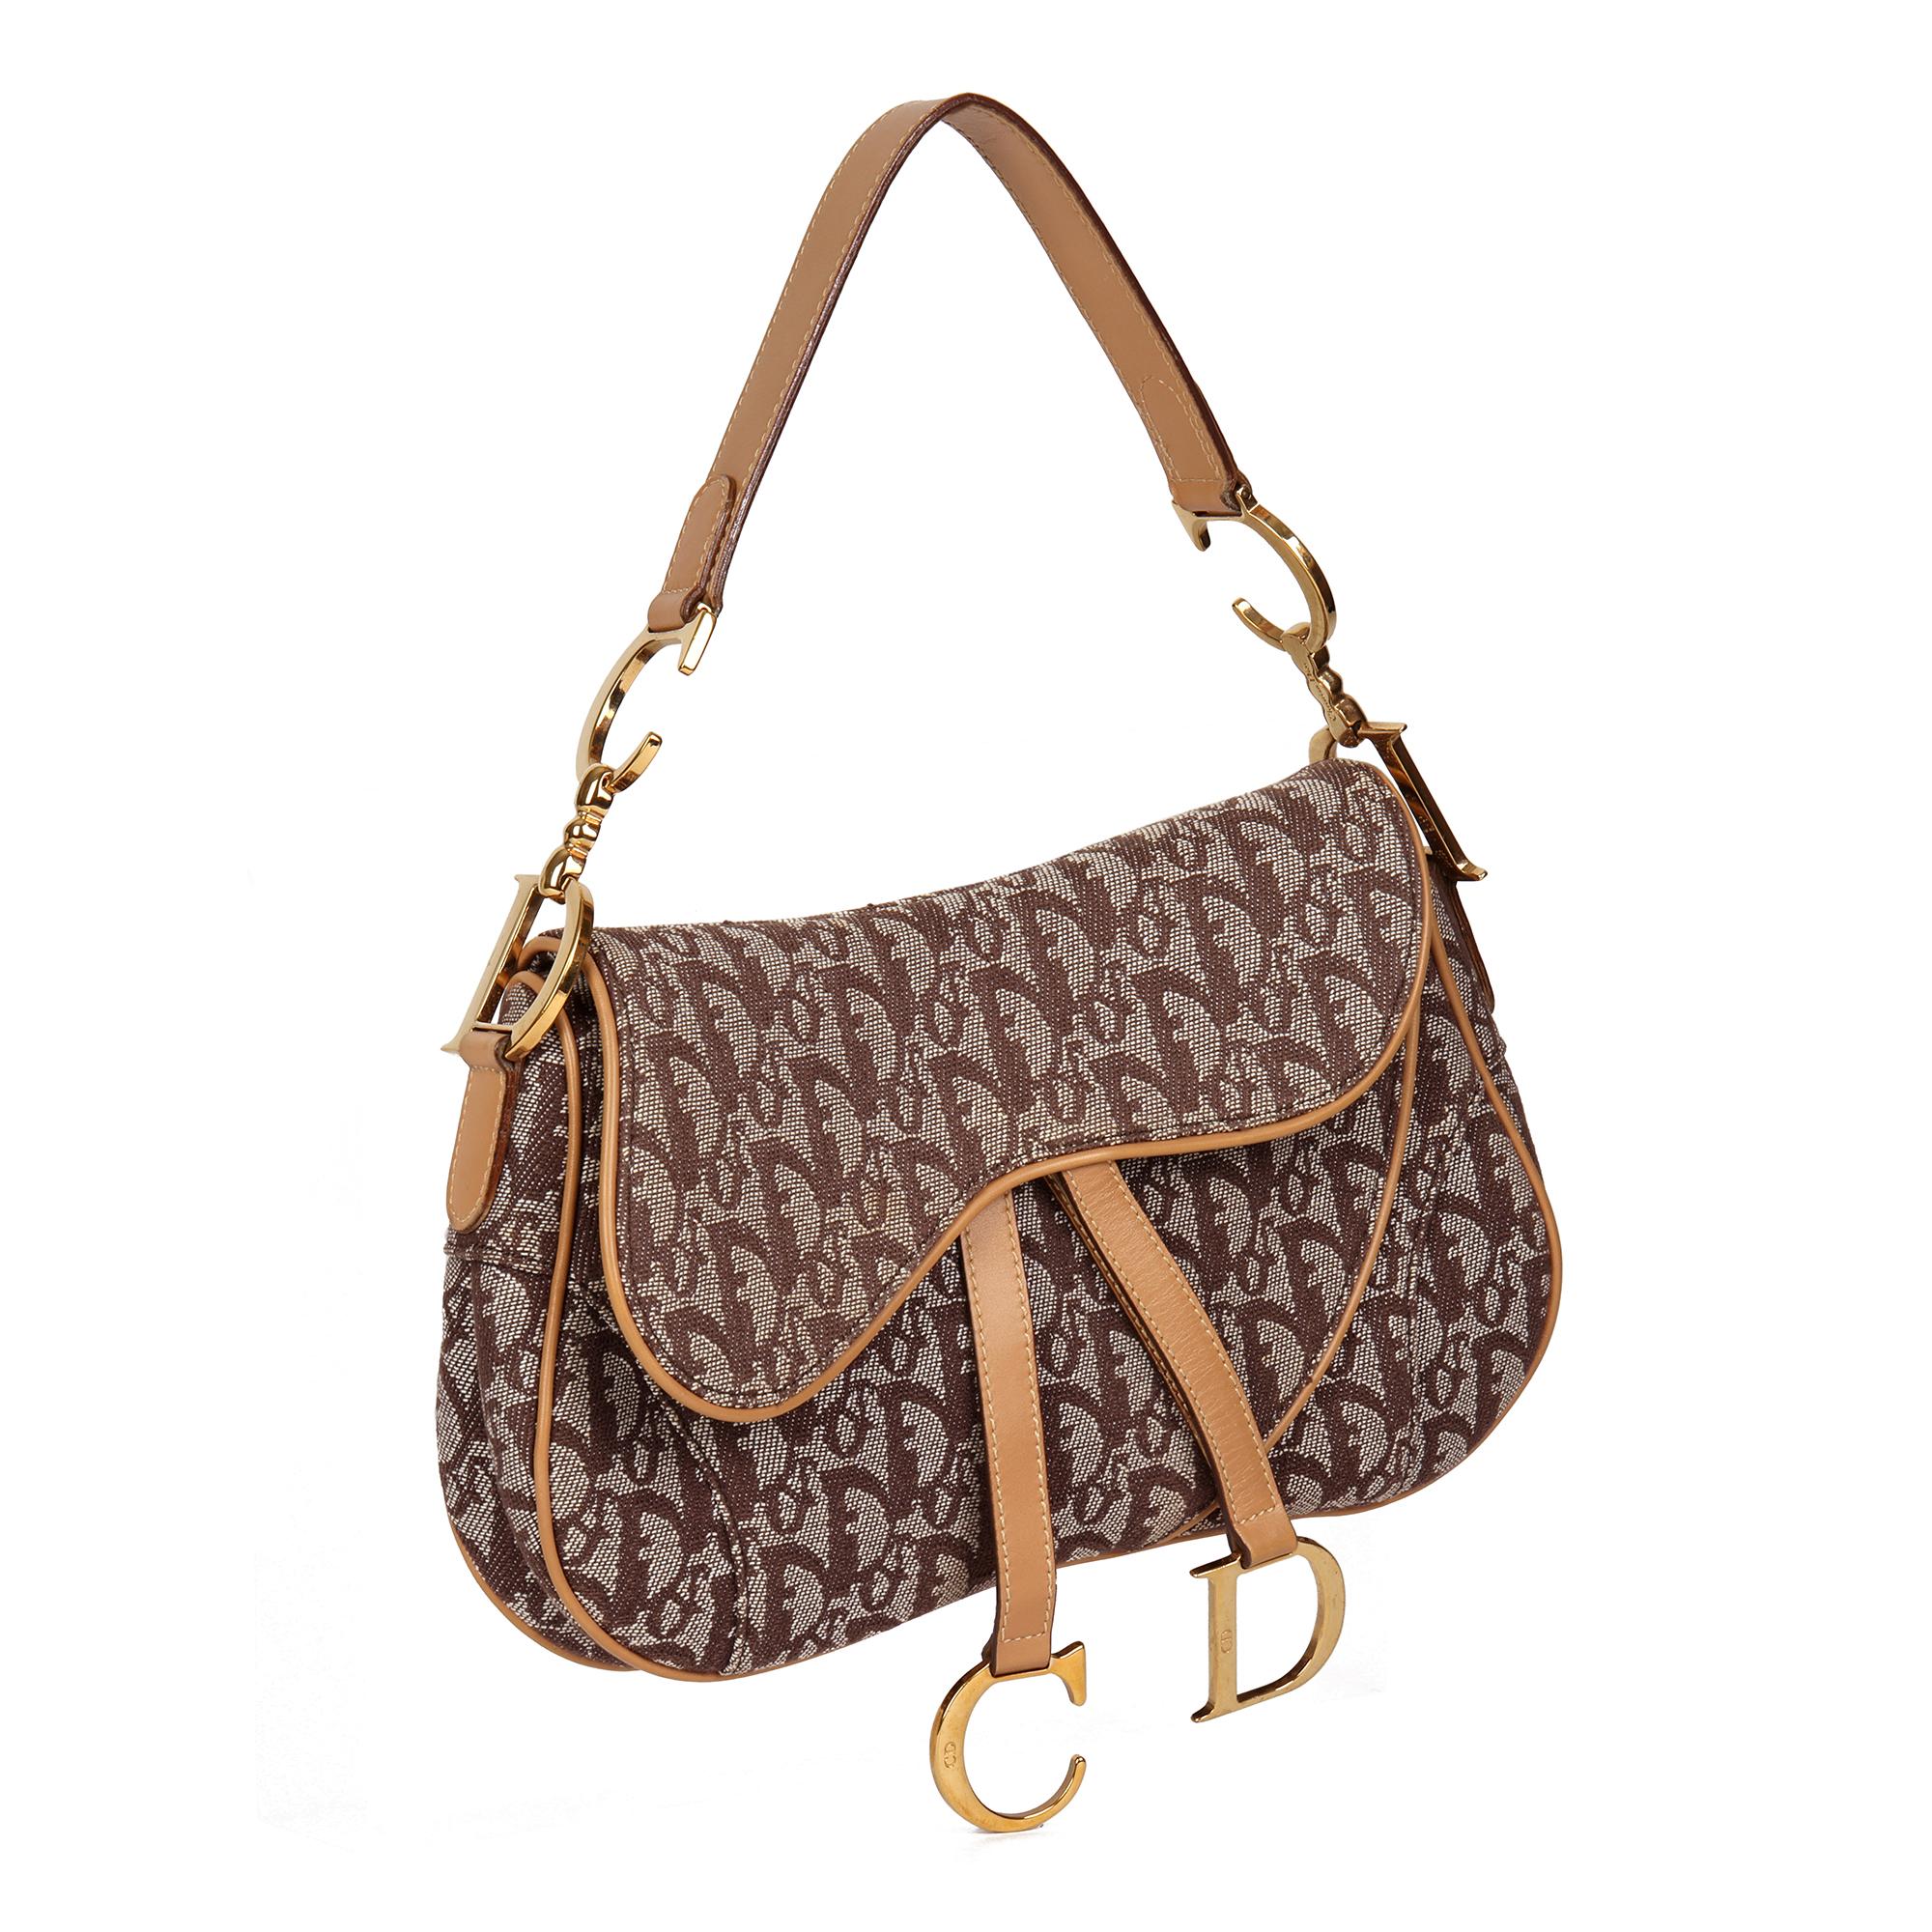 CHRISTIAN DIOR
Brown Monogram Canvas & Calfskin Leather Vintage Double Saddle Bag

Serial Number: RU 1011
Age (Circa): 2001
Authenticity Details: Date Stamp (Made in Italy)
Gender: Ladies
Type: Shoulder, Top Handle

Colour: Brown
Hardware: